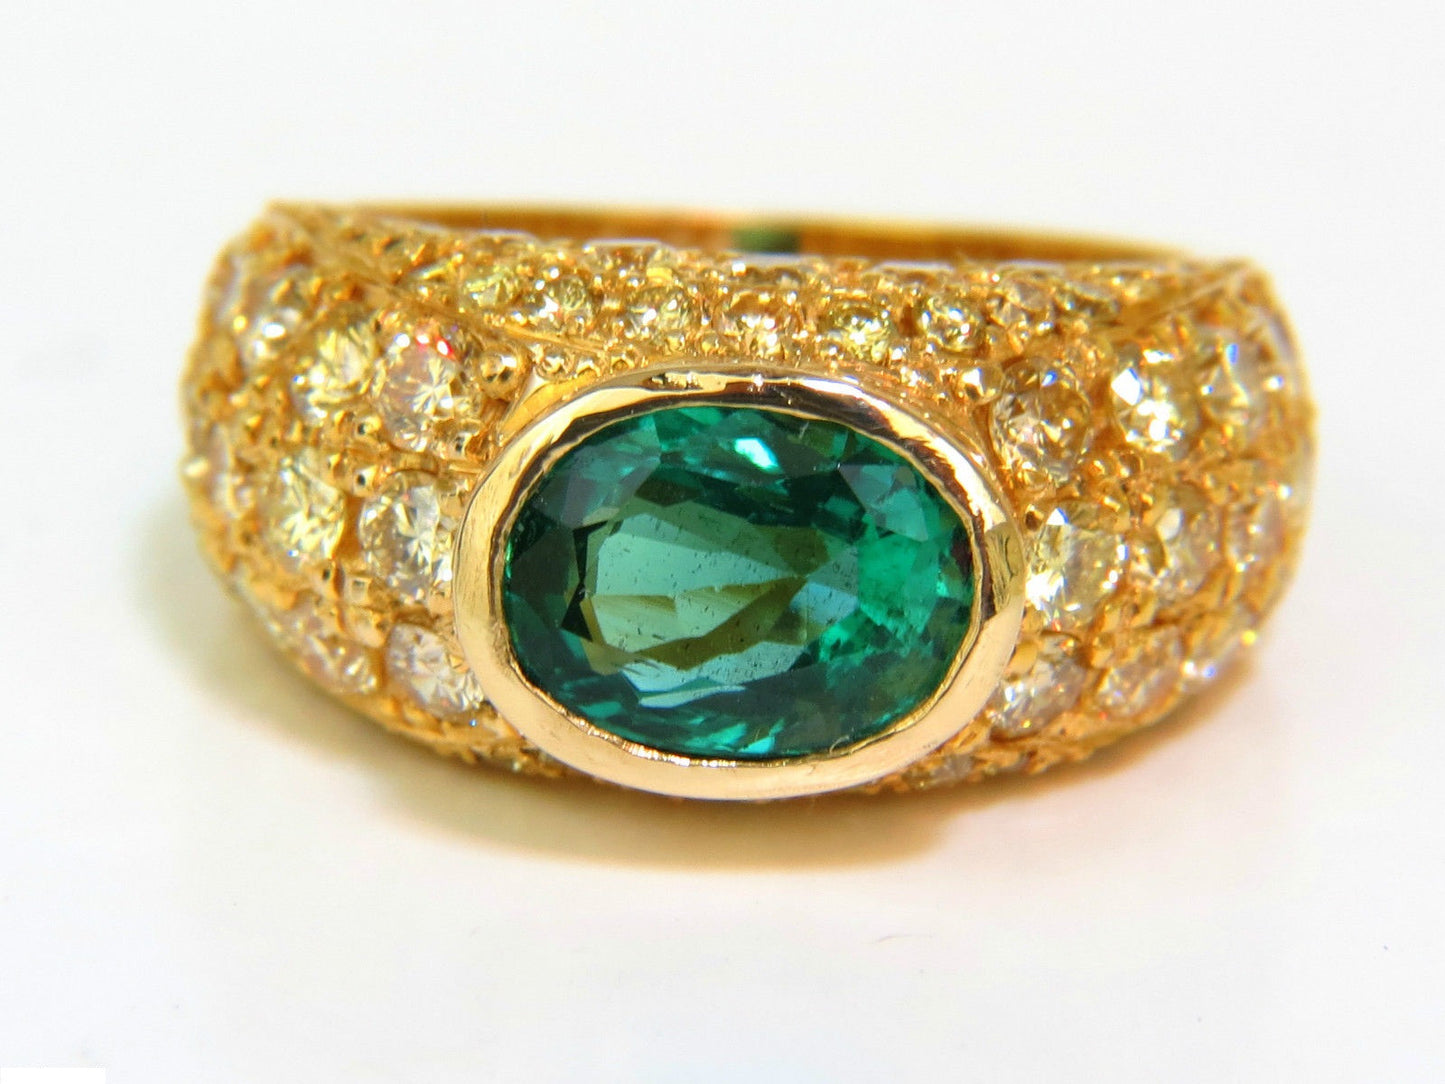 6.30CT ETERNITY NATURAL EMERALD FANCY YELLOW DIAMONDS RING A+ MICRO SET